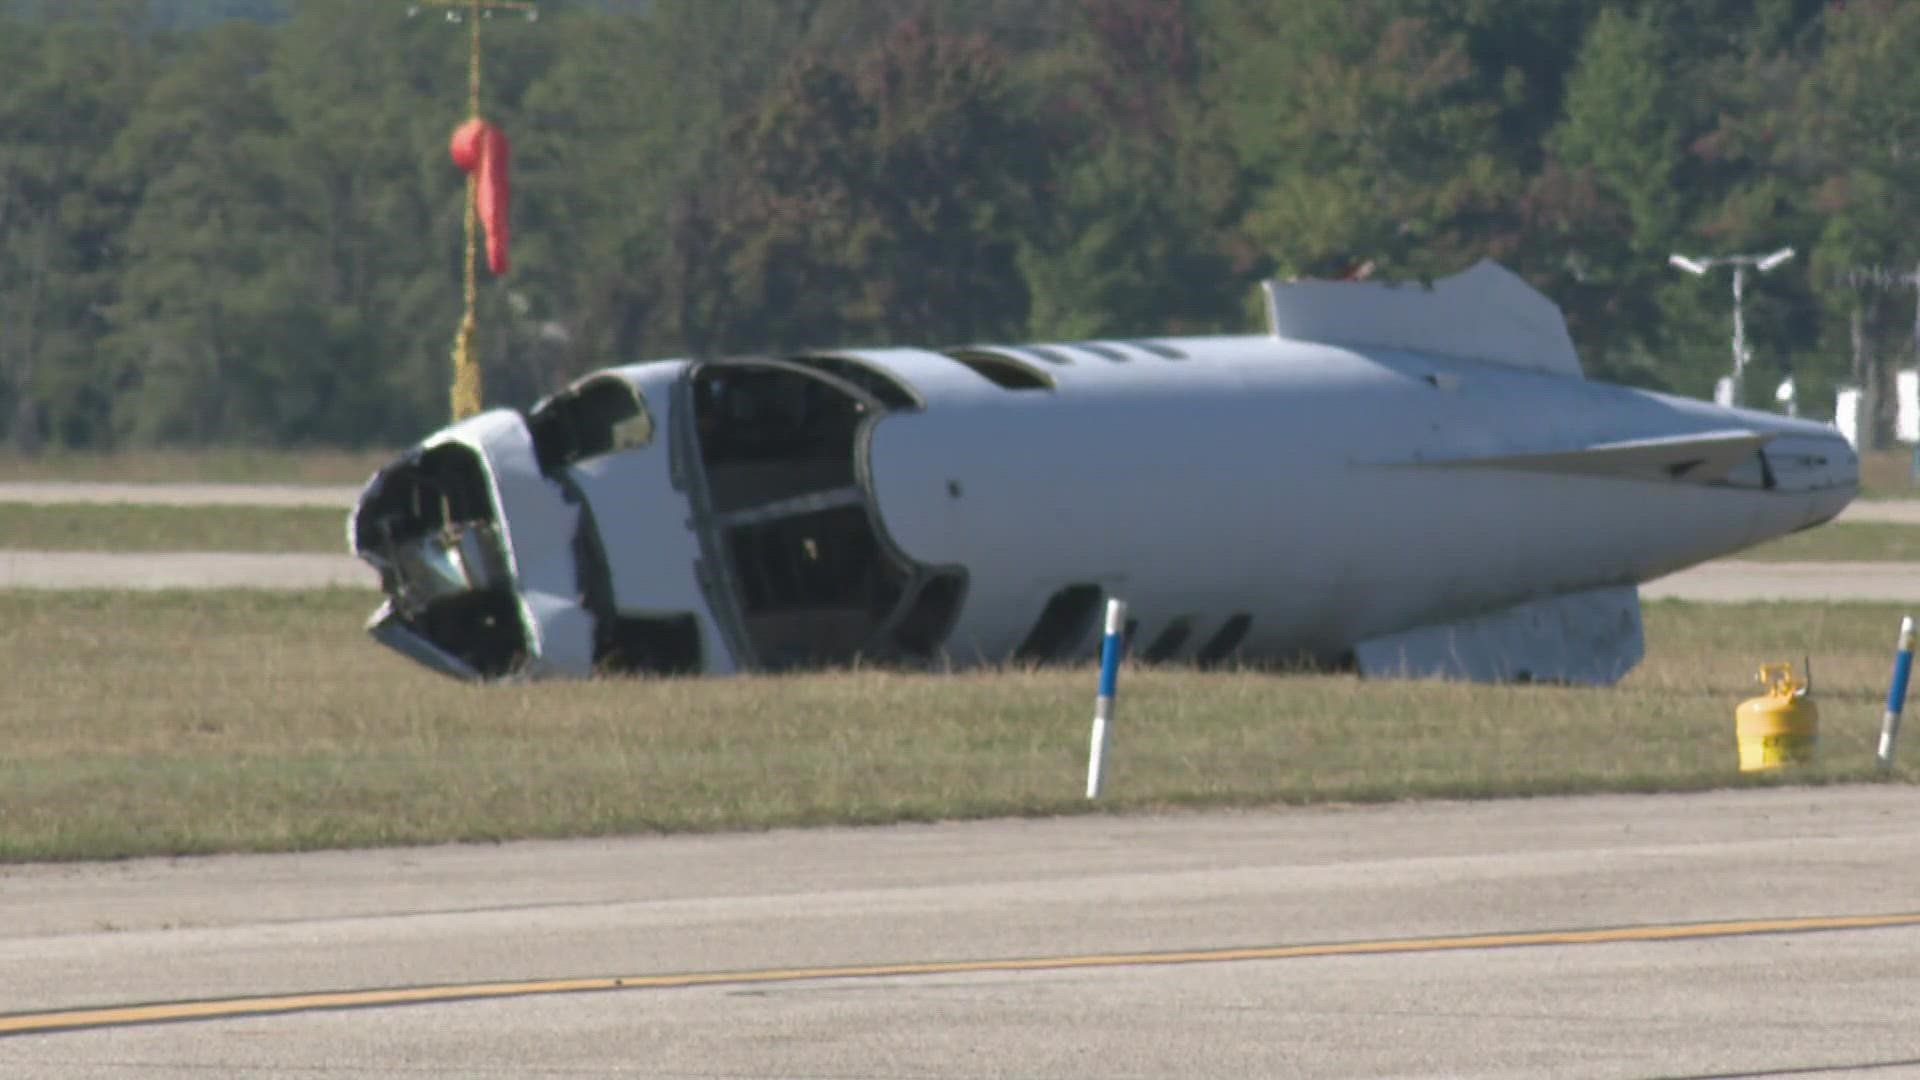 Emergency responders from multiple agencies in Muskegon County took part in a plane crash drill at the Muskegon County Airport on Thursday.